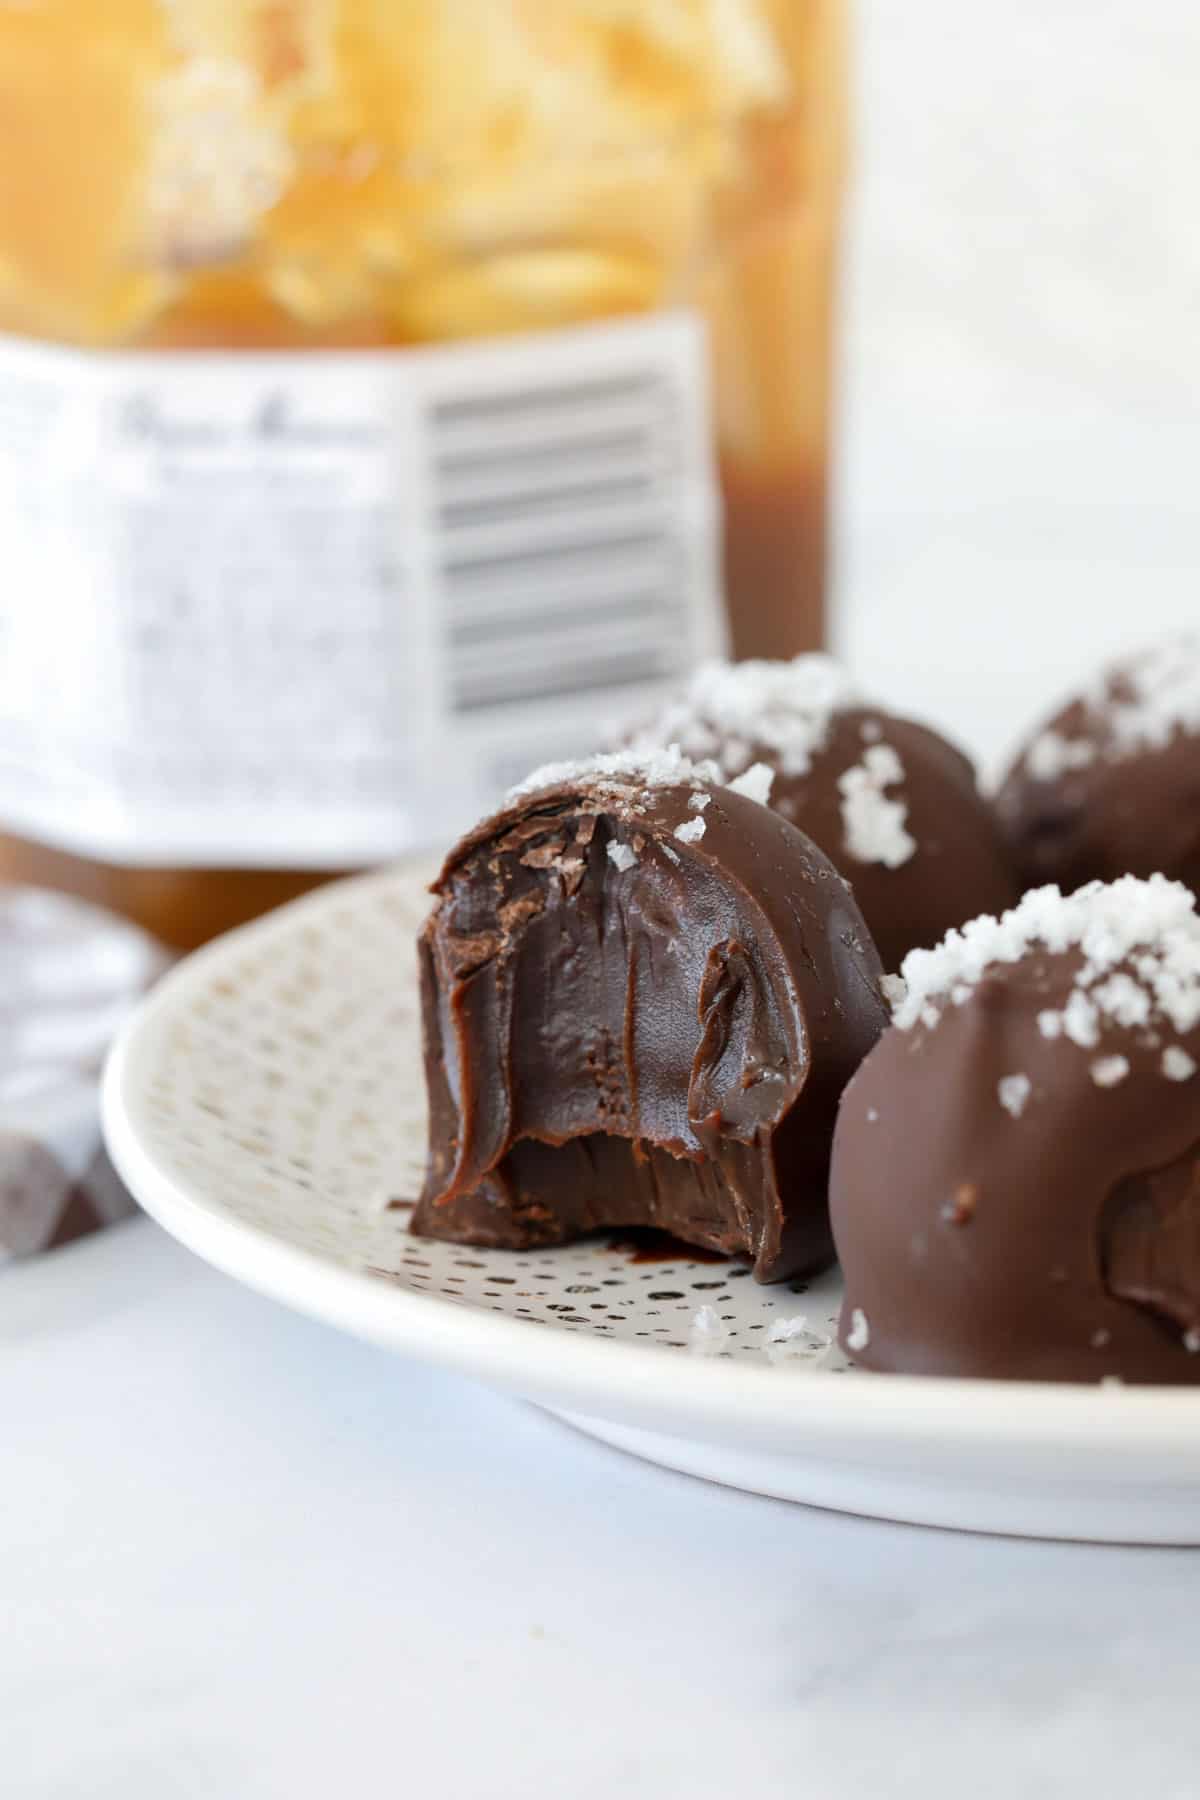 A salted caramel truffle bitten in half to show the smooth ganache filling.